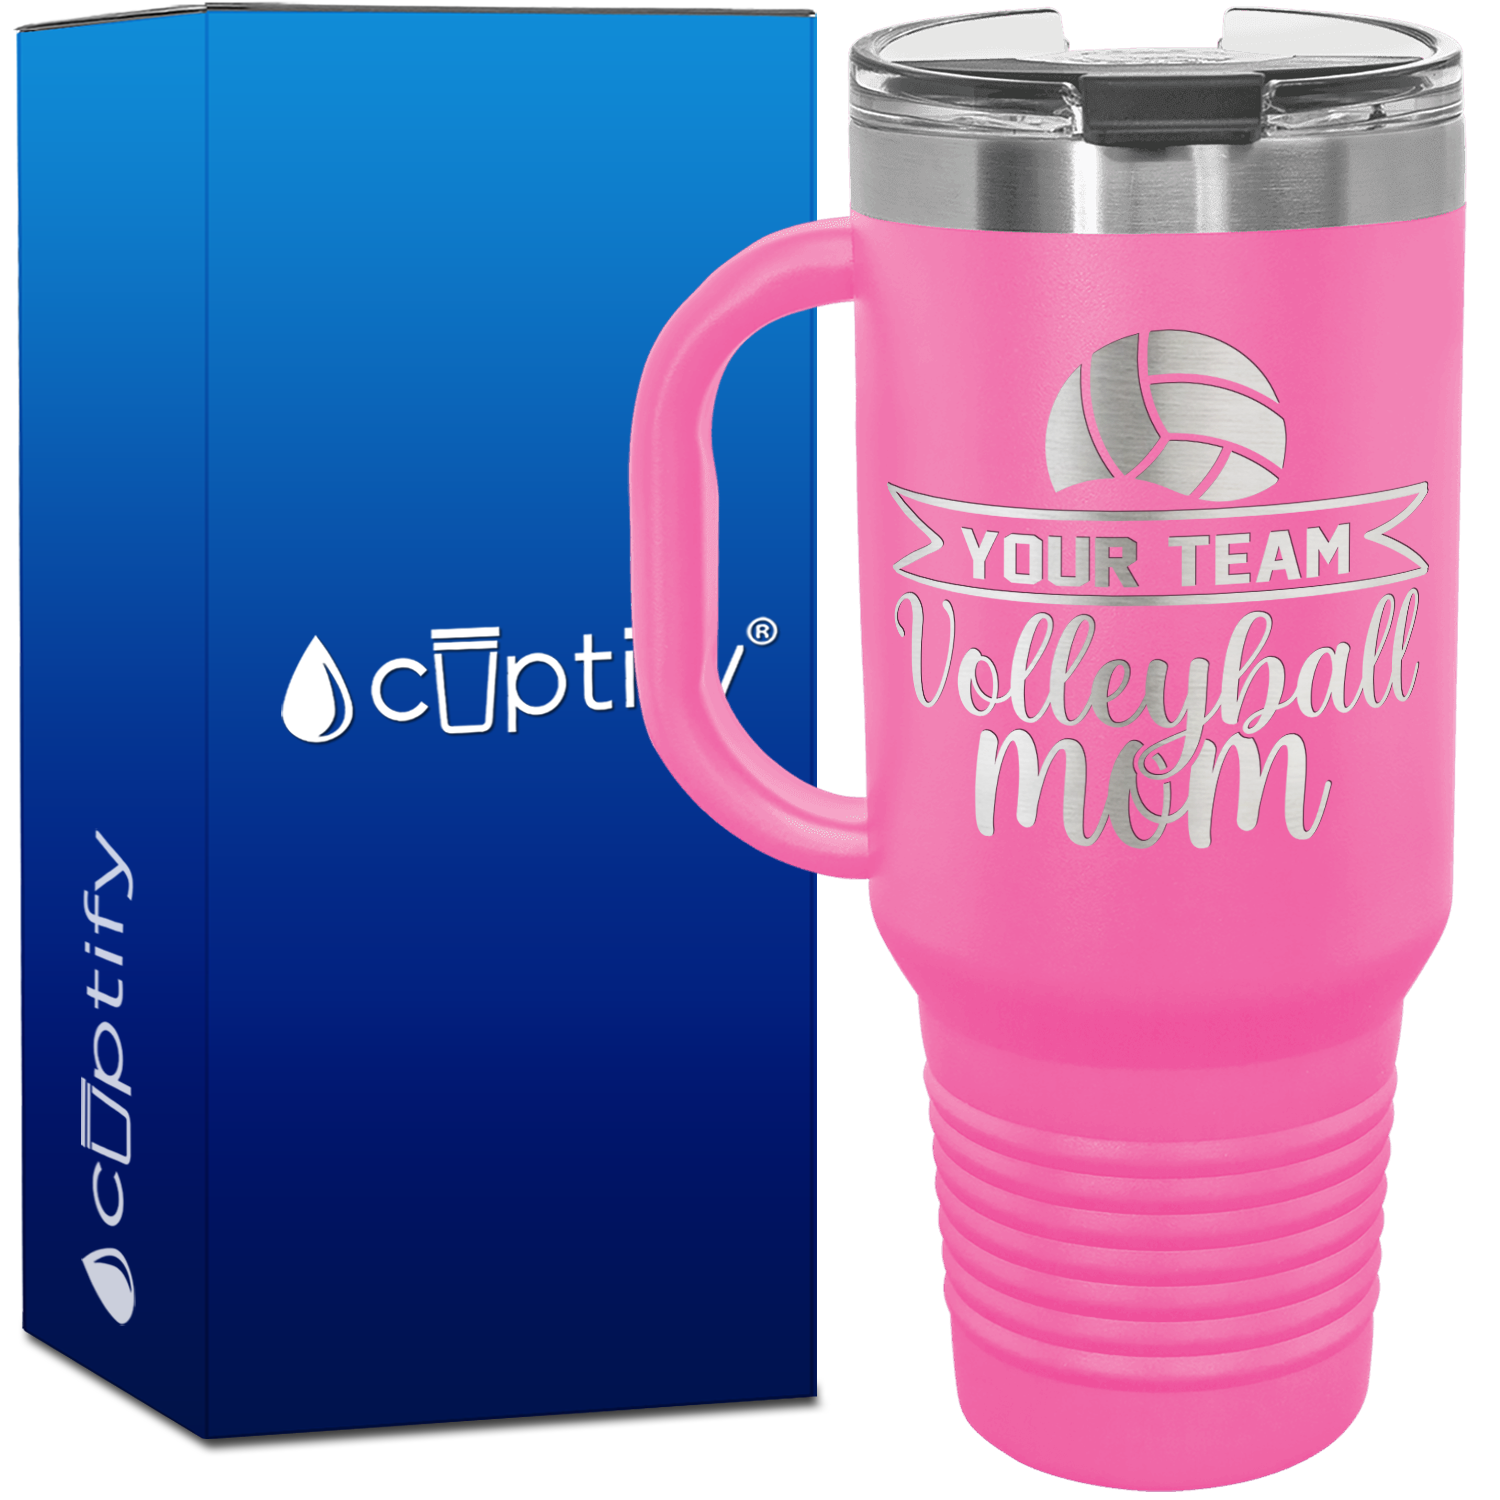 Personalized Team Name Volleyball Mom 40oz Volleyball Travel Mug